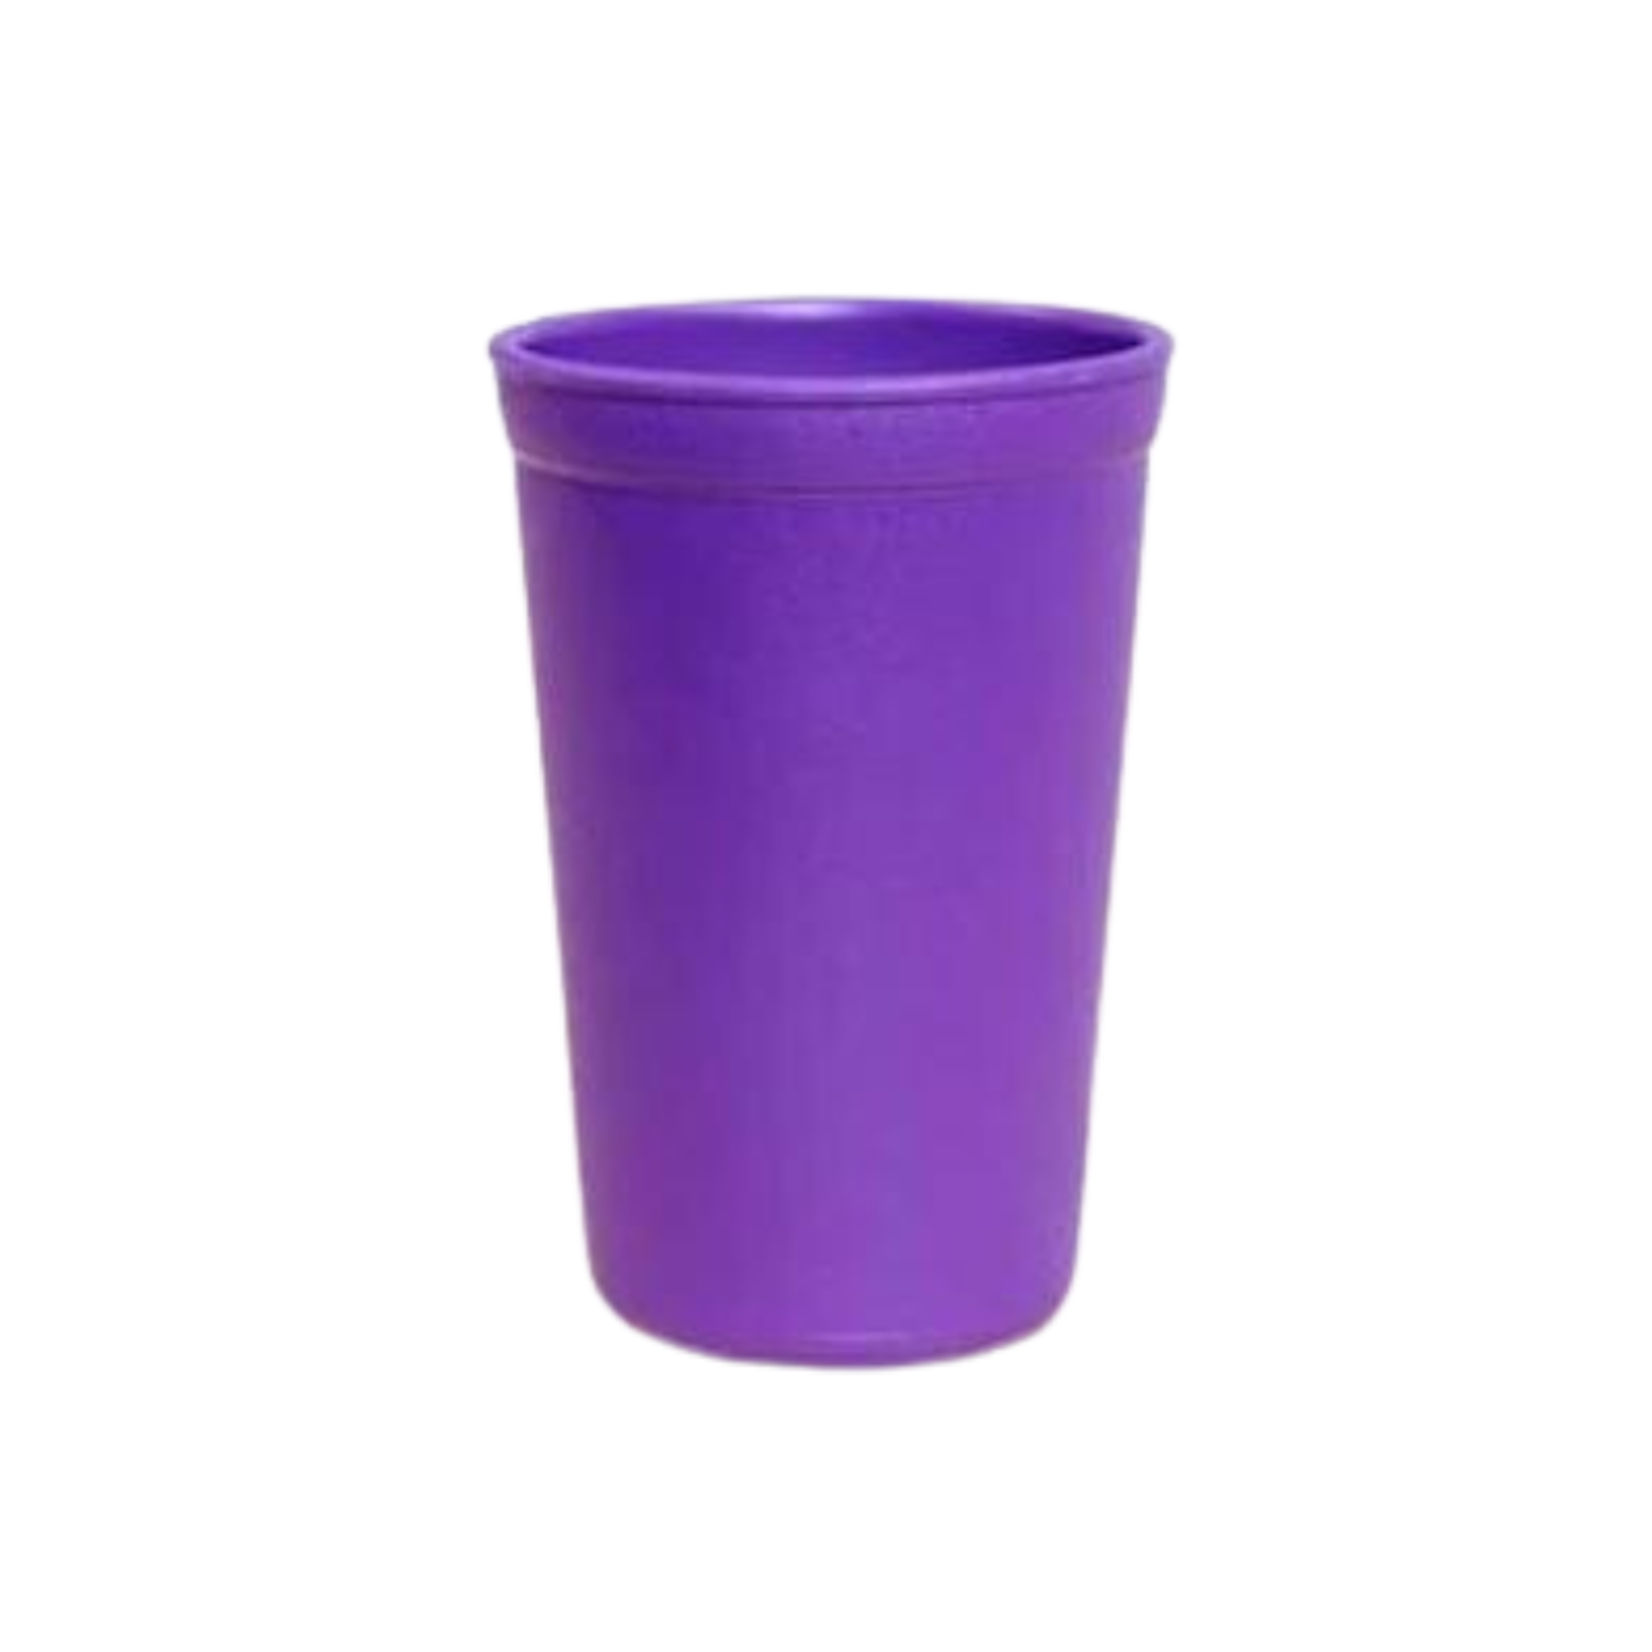 Replay Replay Drinking Cups Amethyst